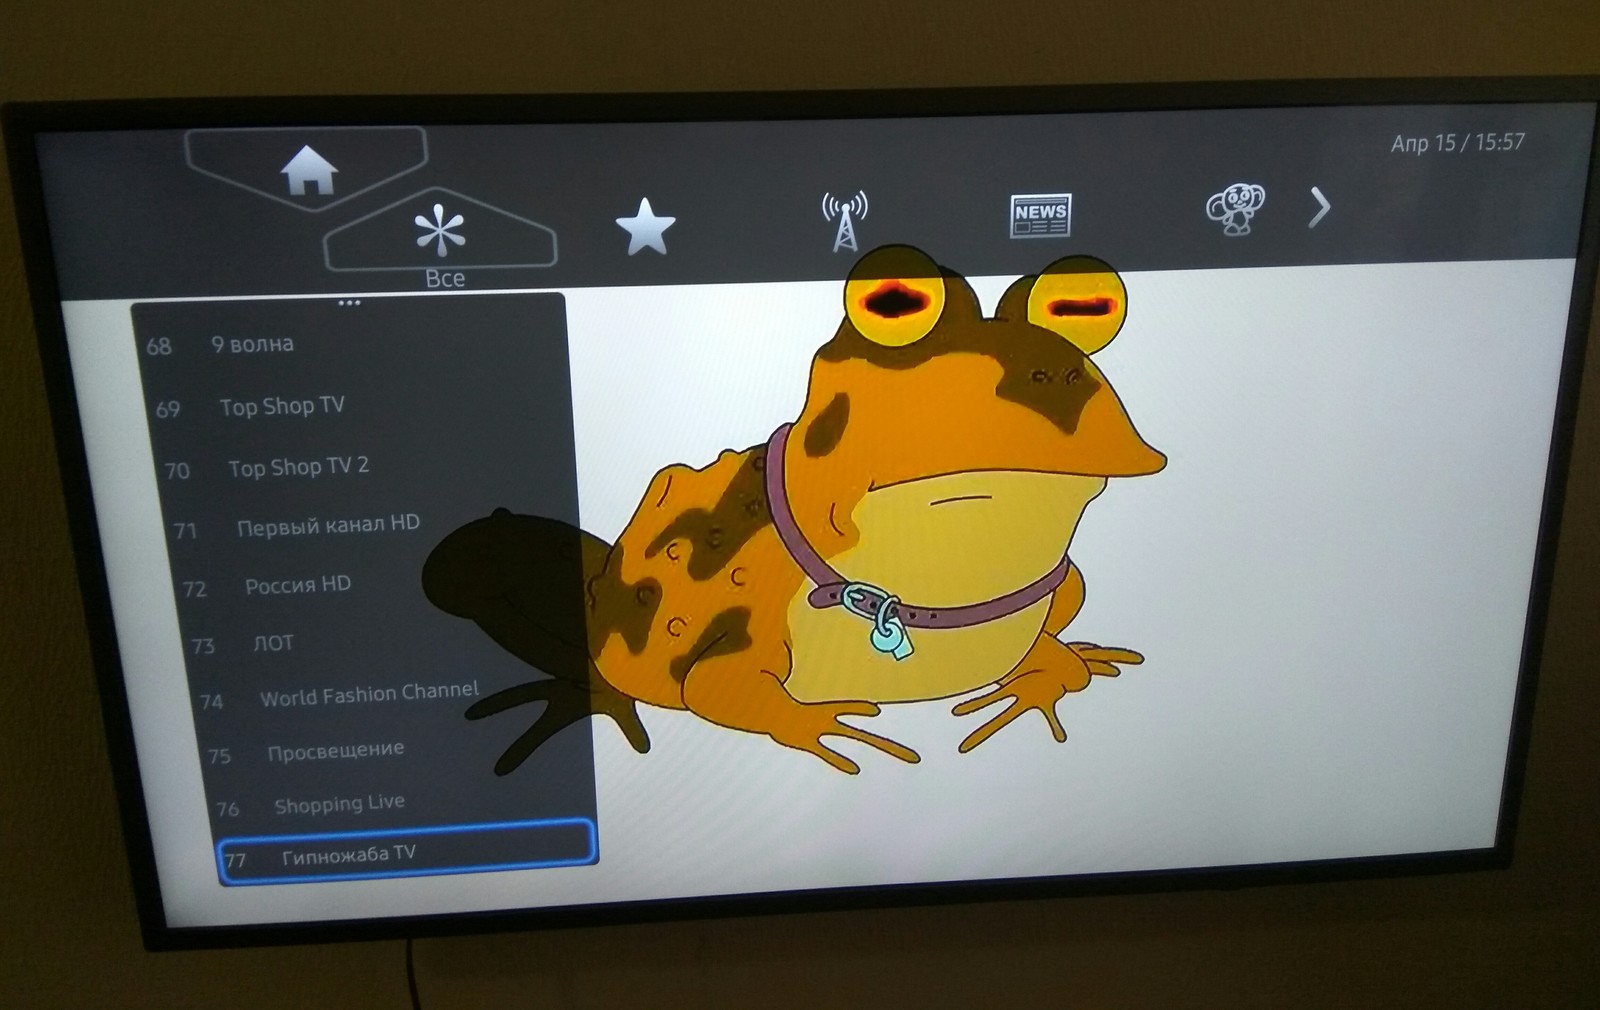 When I connected the cable - My, Hypnotoad, Cable, The television, Channel